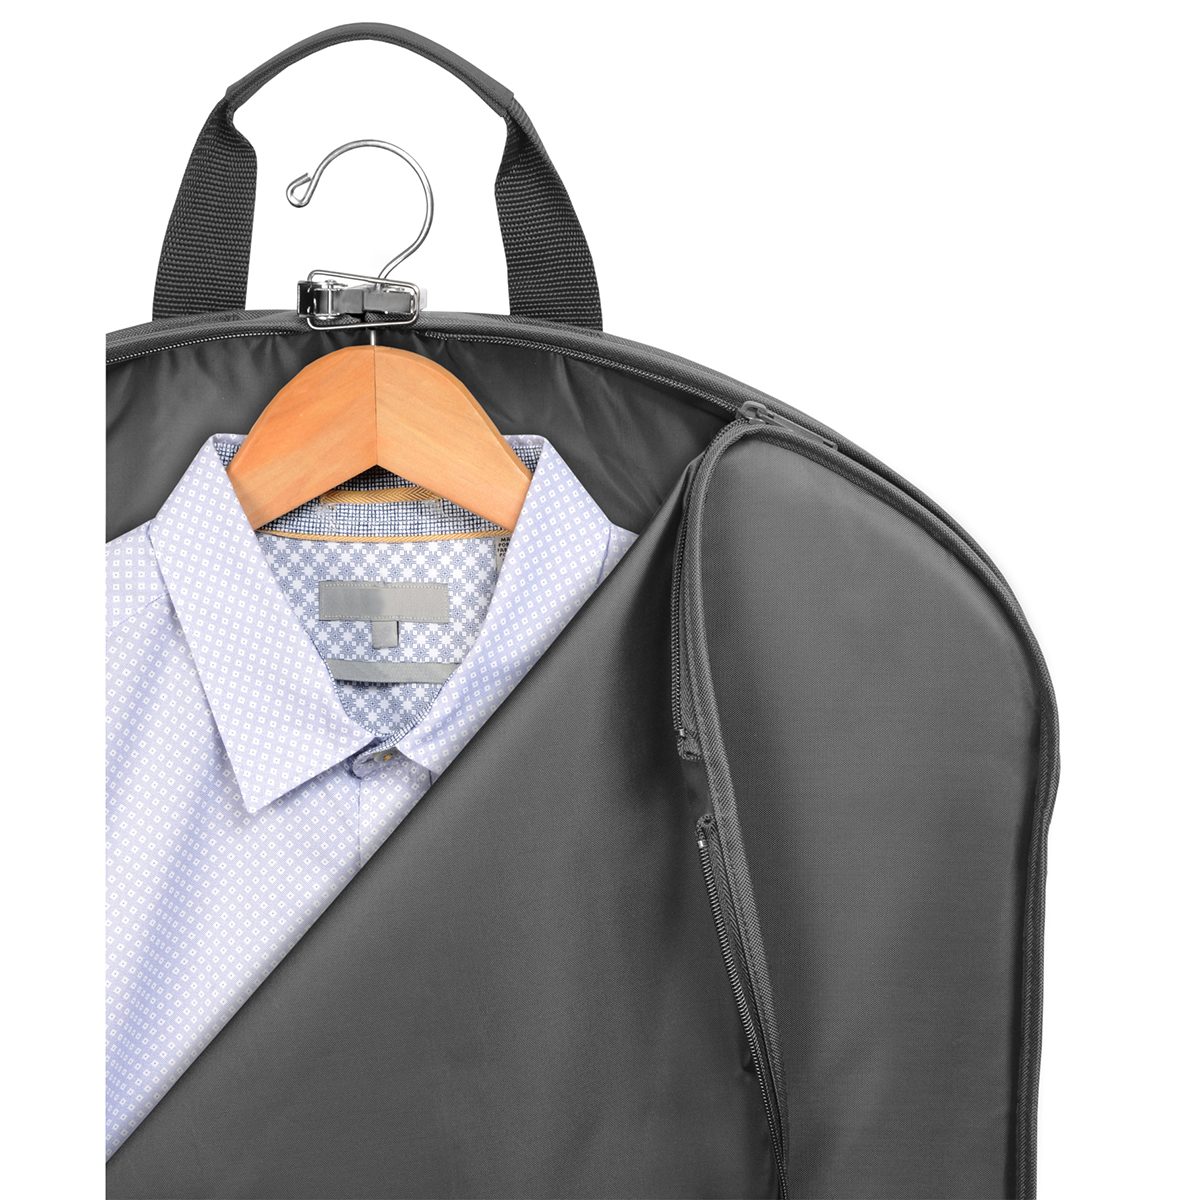 WallyBags(R) 45in. Extra Capacity Travel Garment Bag